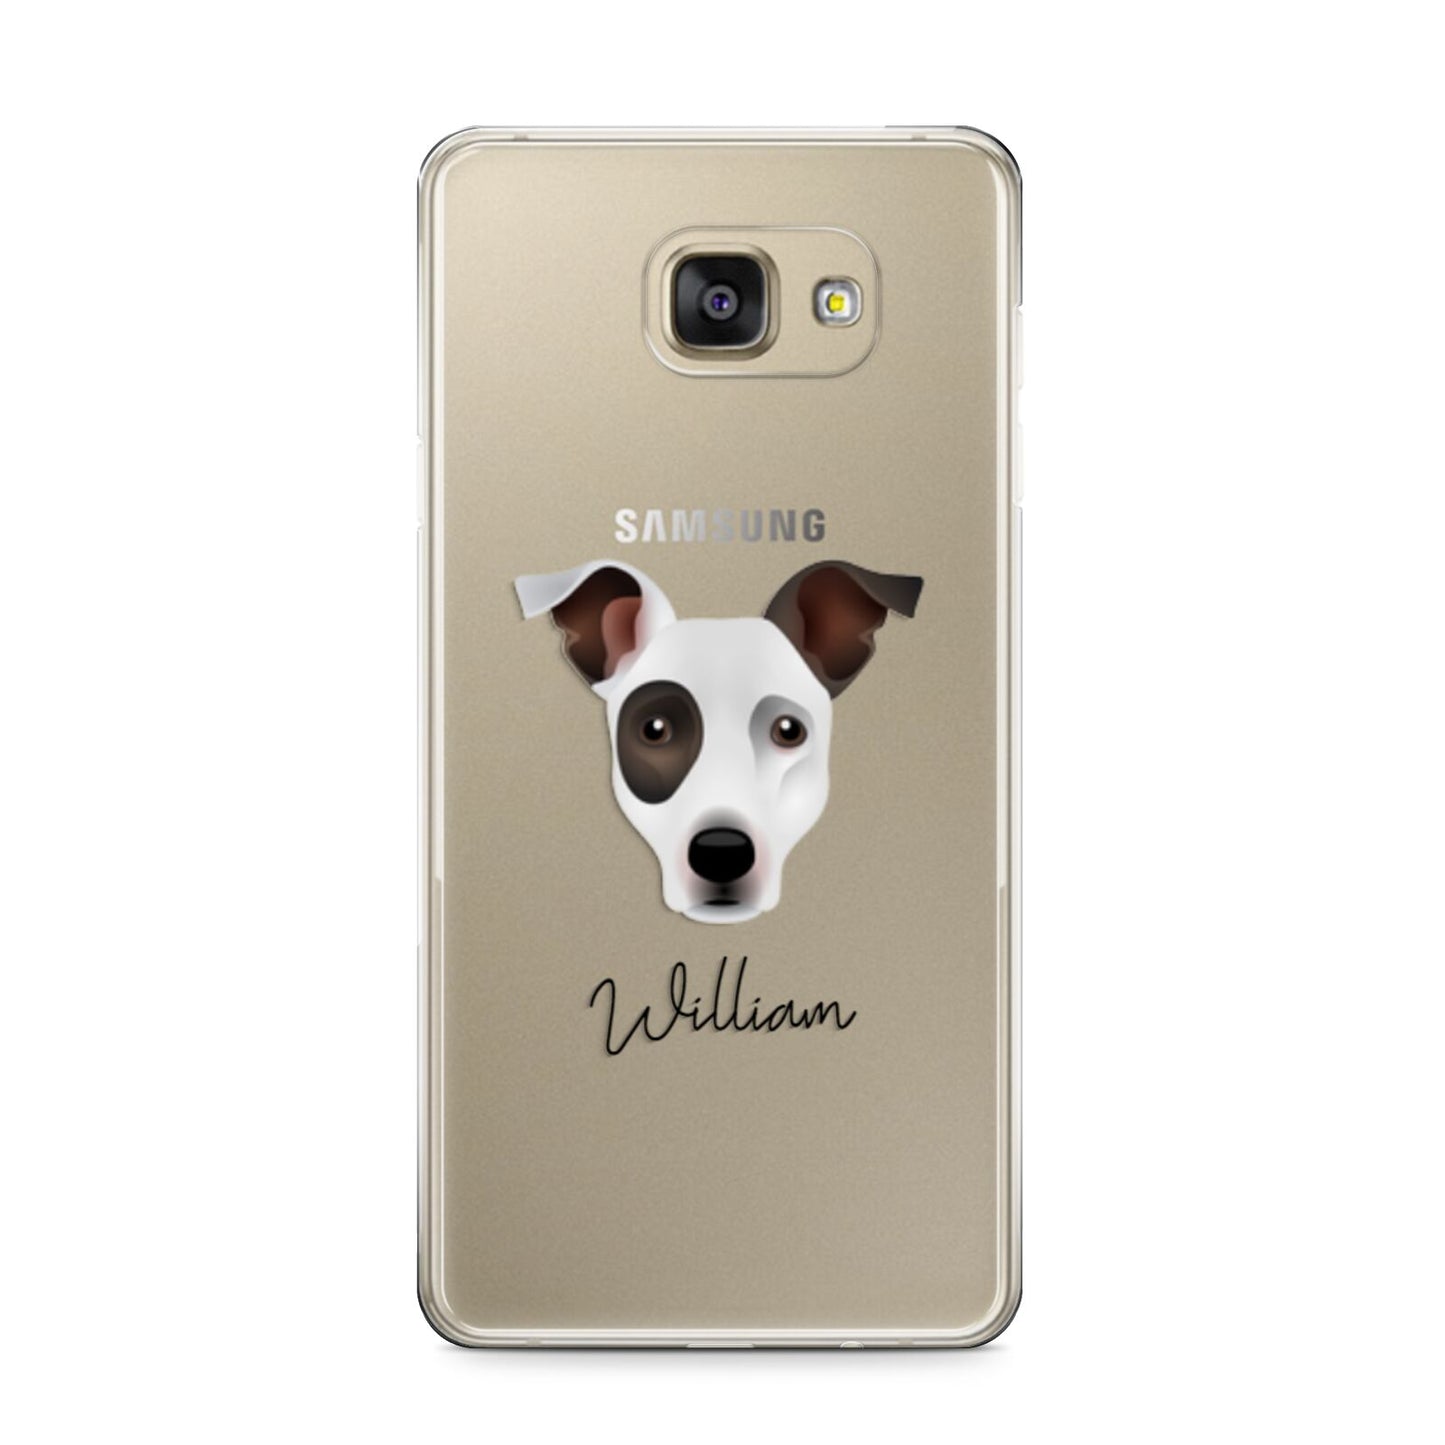 Staffy Jack Personalised Samsung Galaxy A9 2016 Case on gold phone